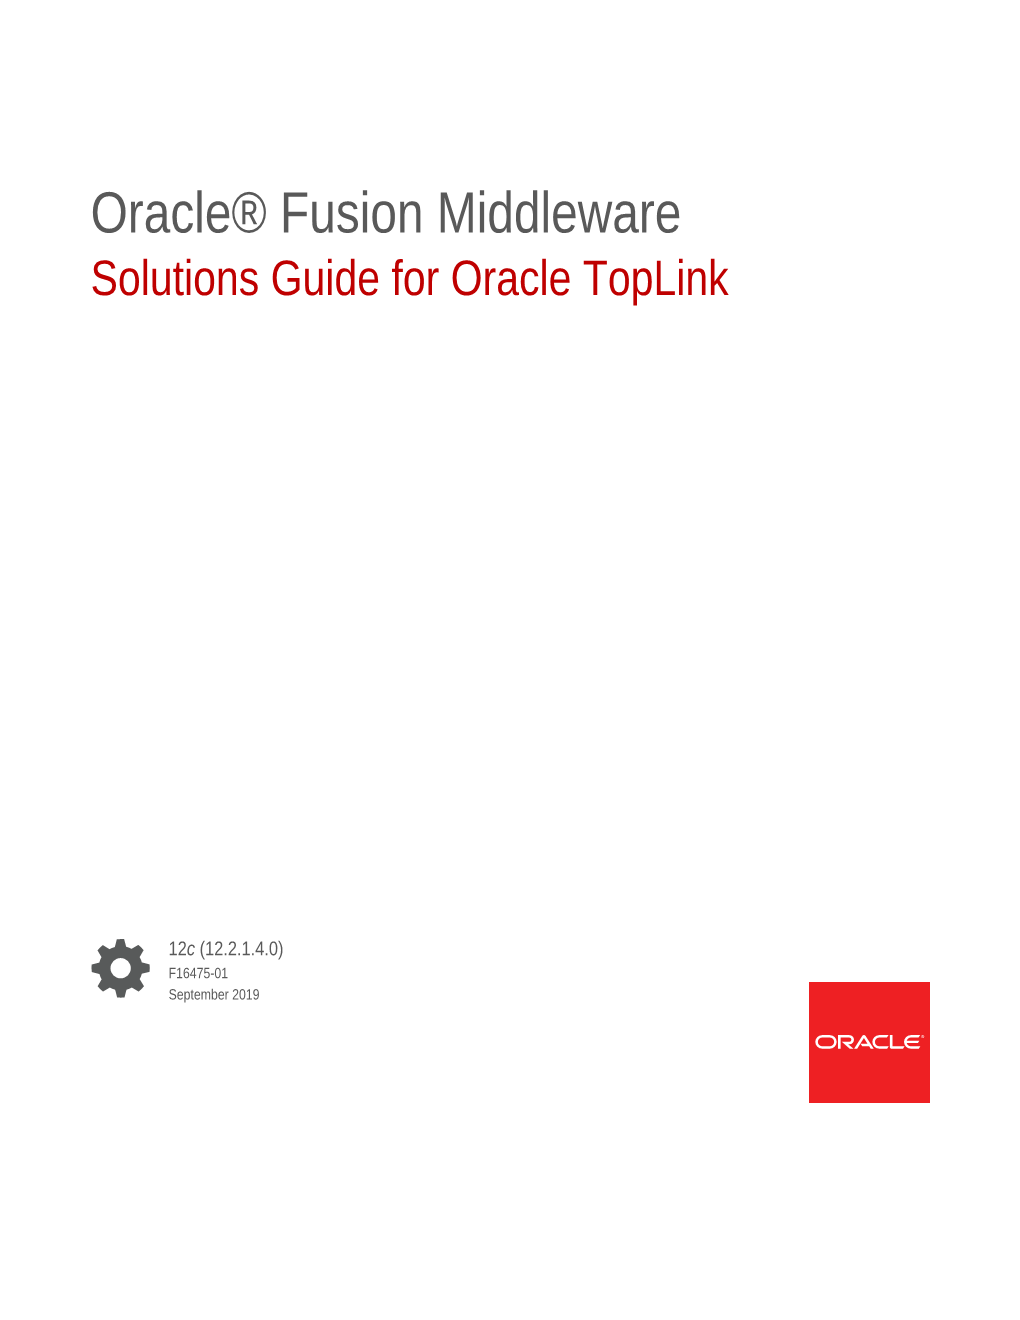 Solutions Guide for Oracle Toplink